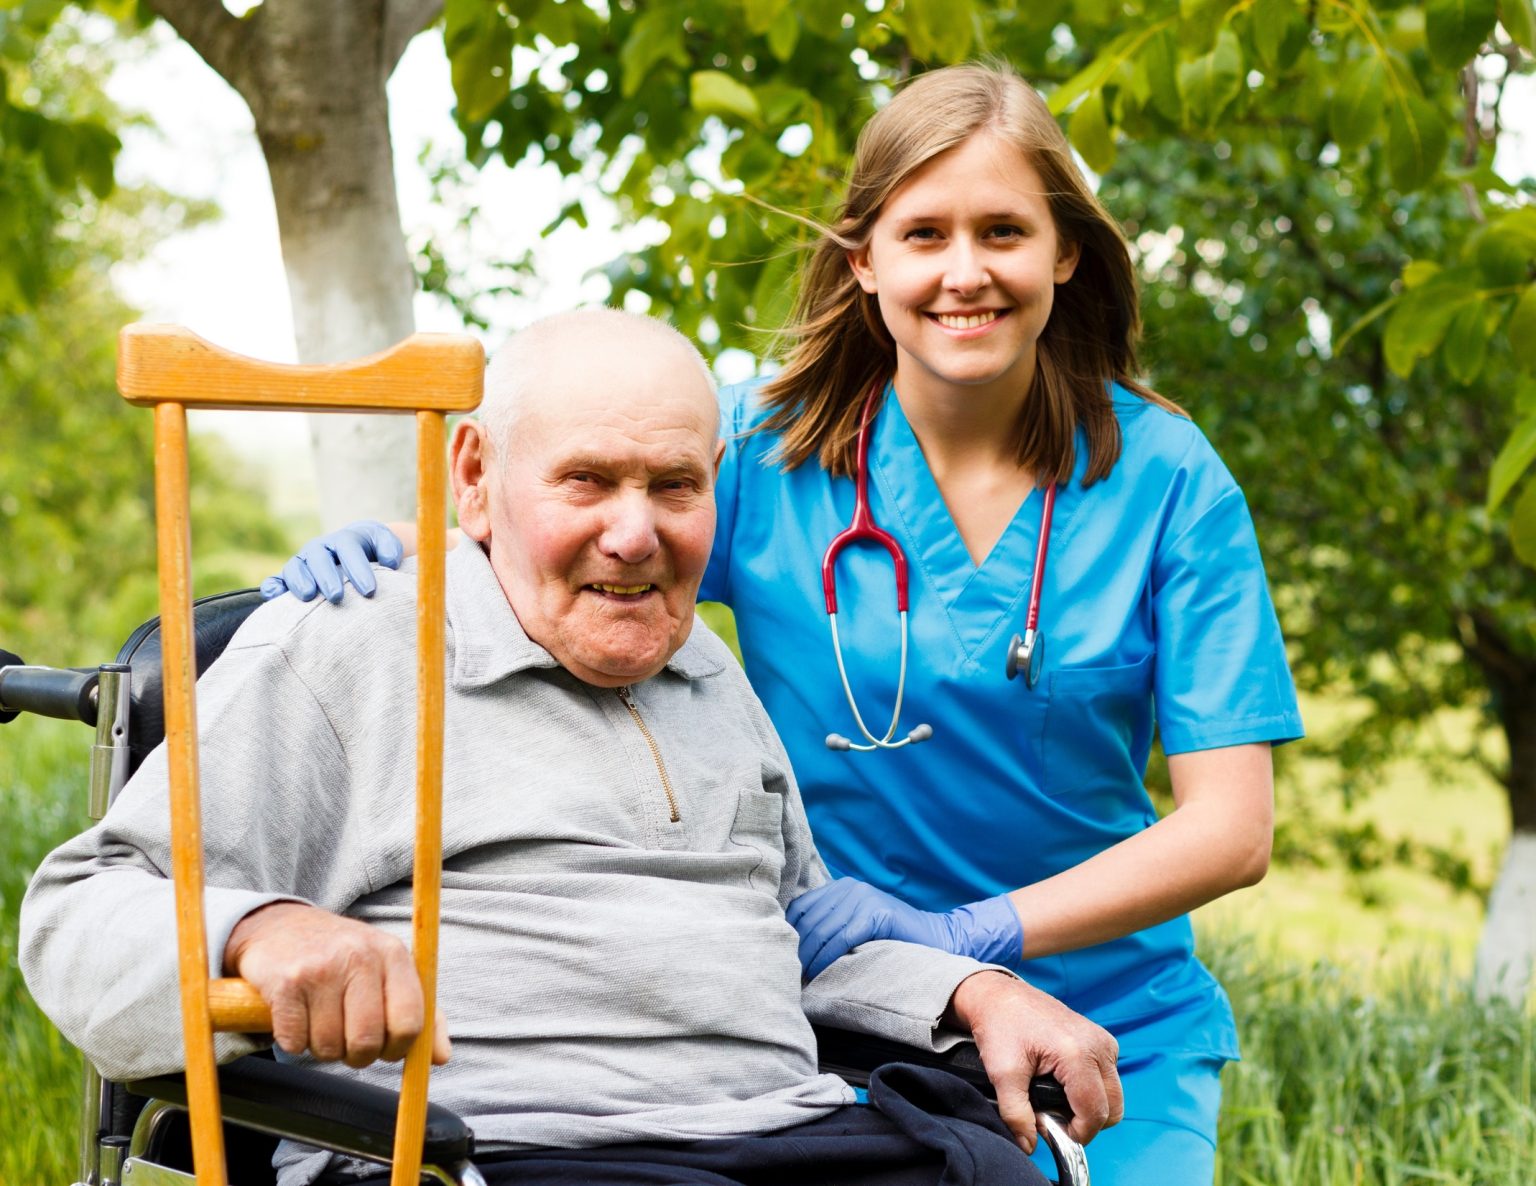 Using The Services Of Home Health Care In Miami FL